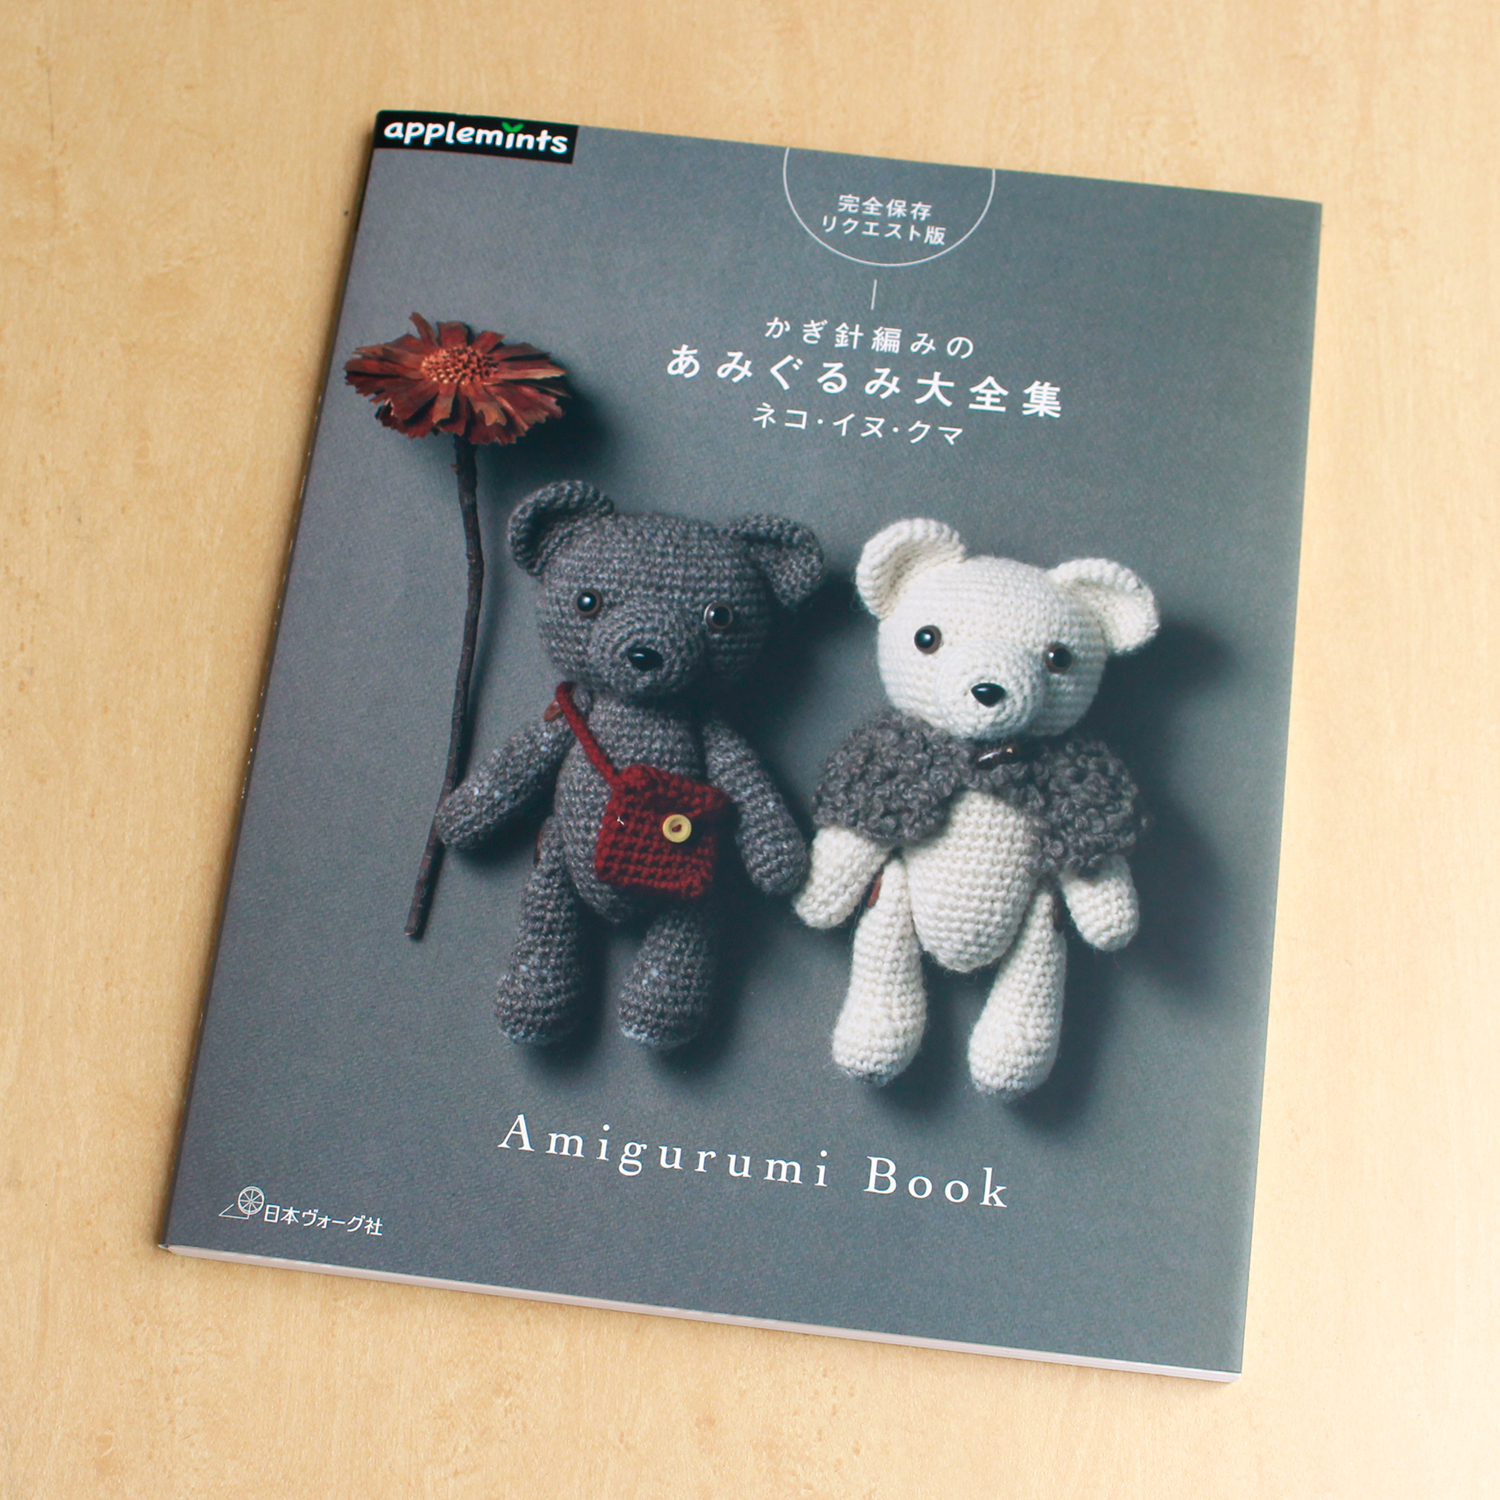 NV72160 Amigurumi compendium: Cats, Dogs, and Bears(book)